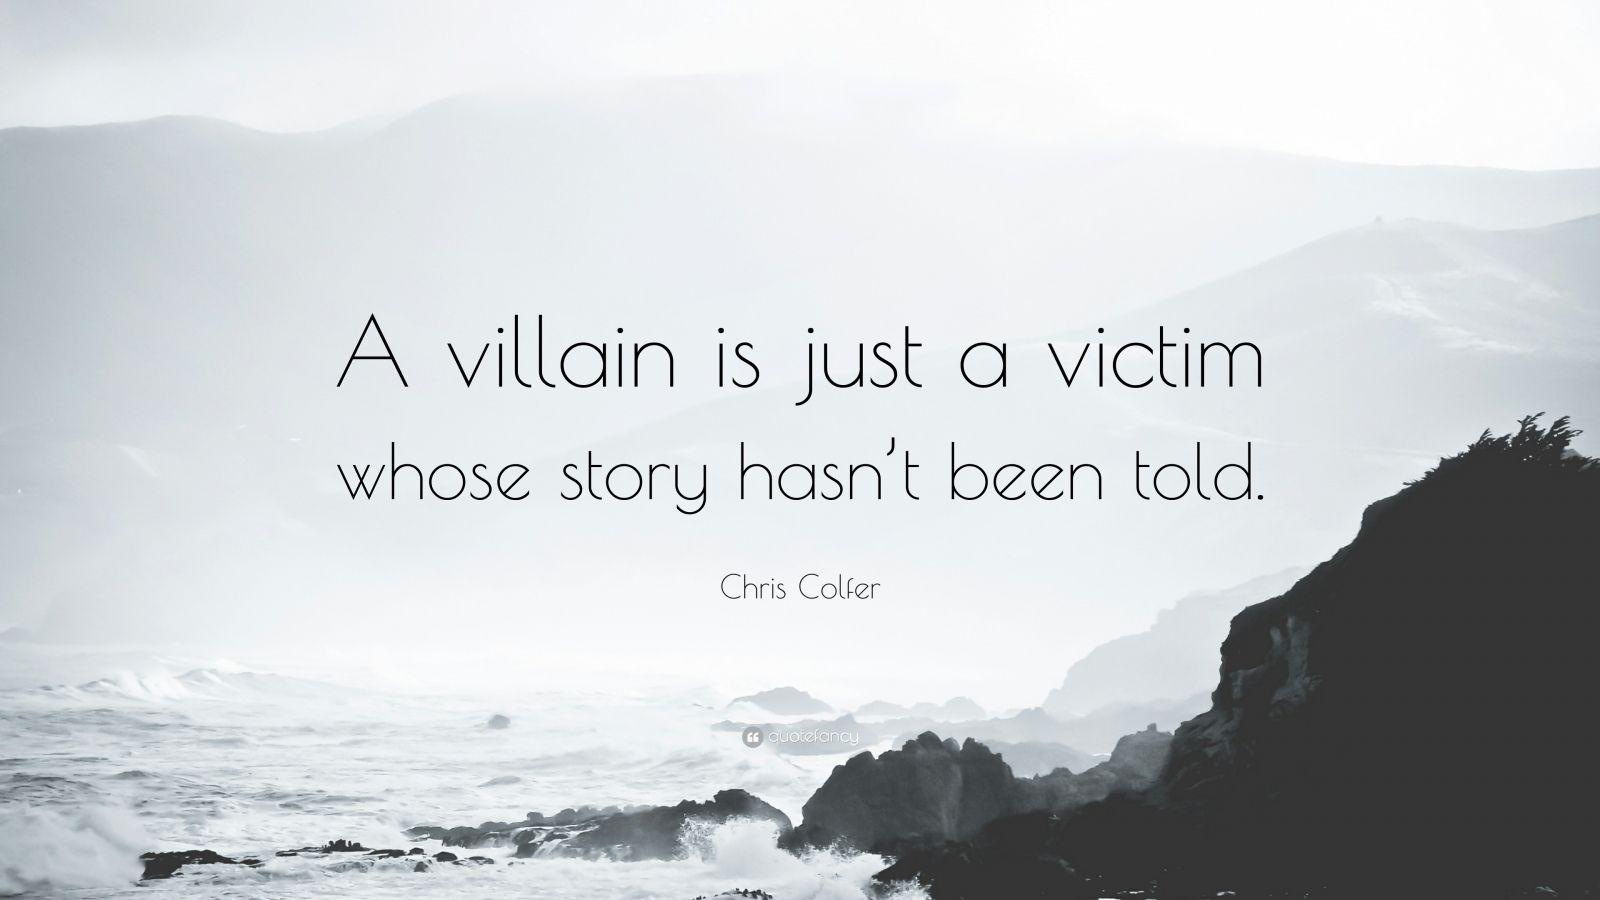 Chris Colfer Quote: “A villain is just a victim whose story hasn't been told.”